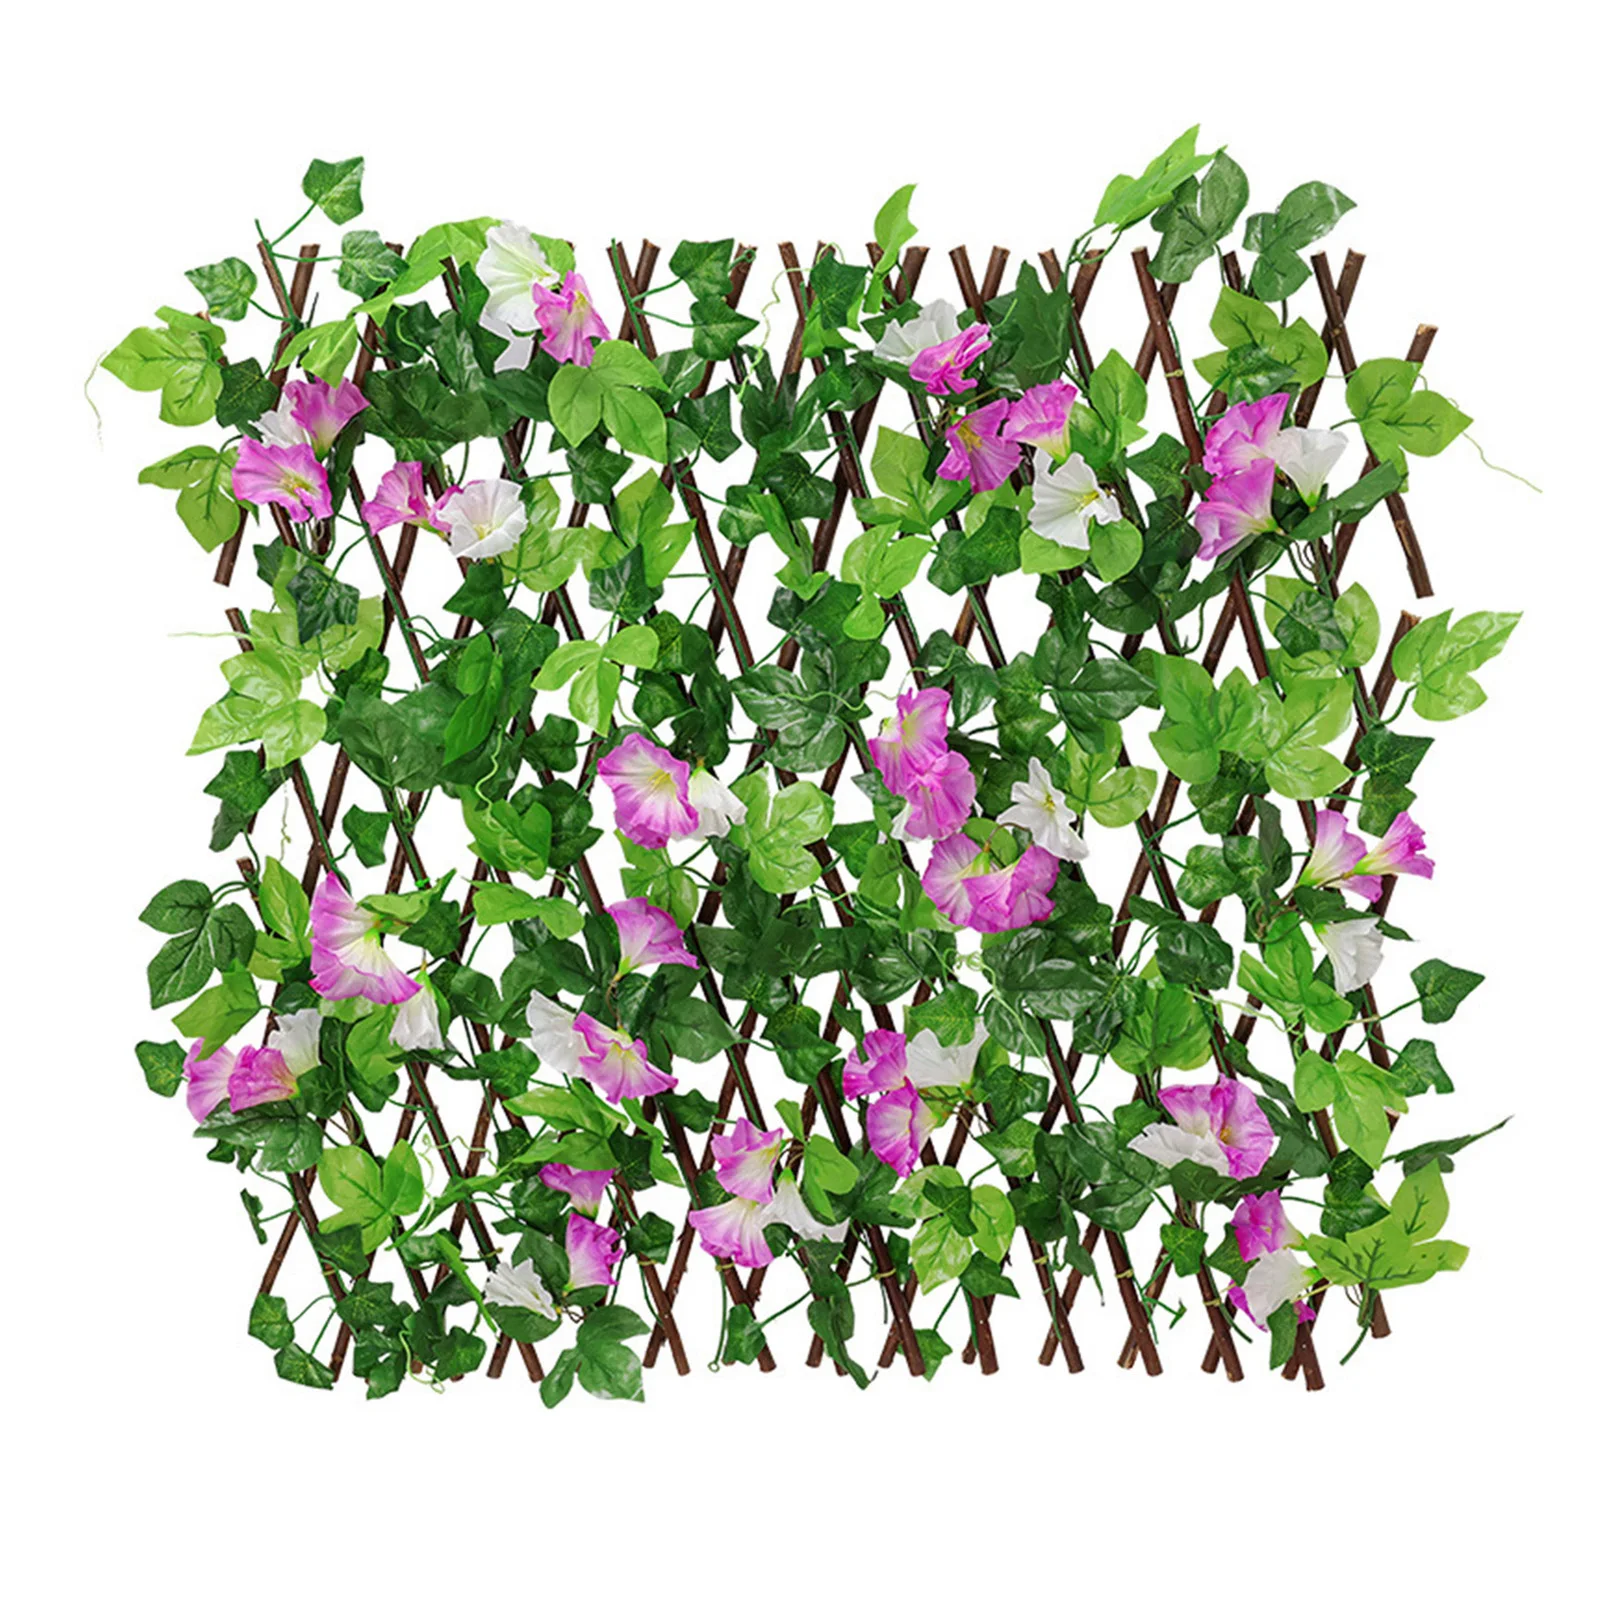 

Wooden Hedge with Artificial Flowers Leaves Garden Decoration Screening Expanding Trellis Privacy Screen Retractable Fence